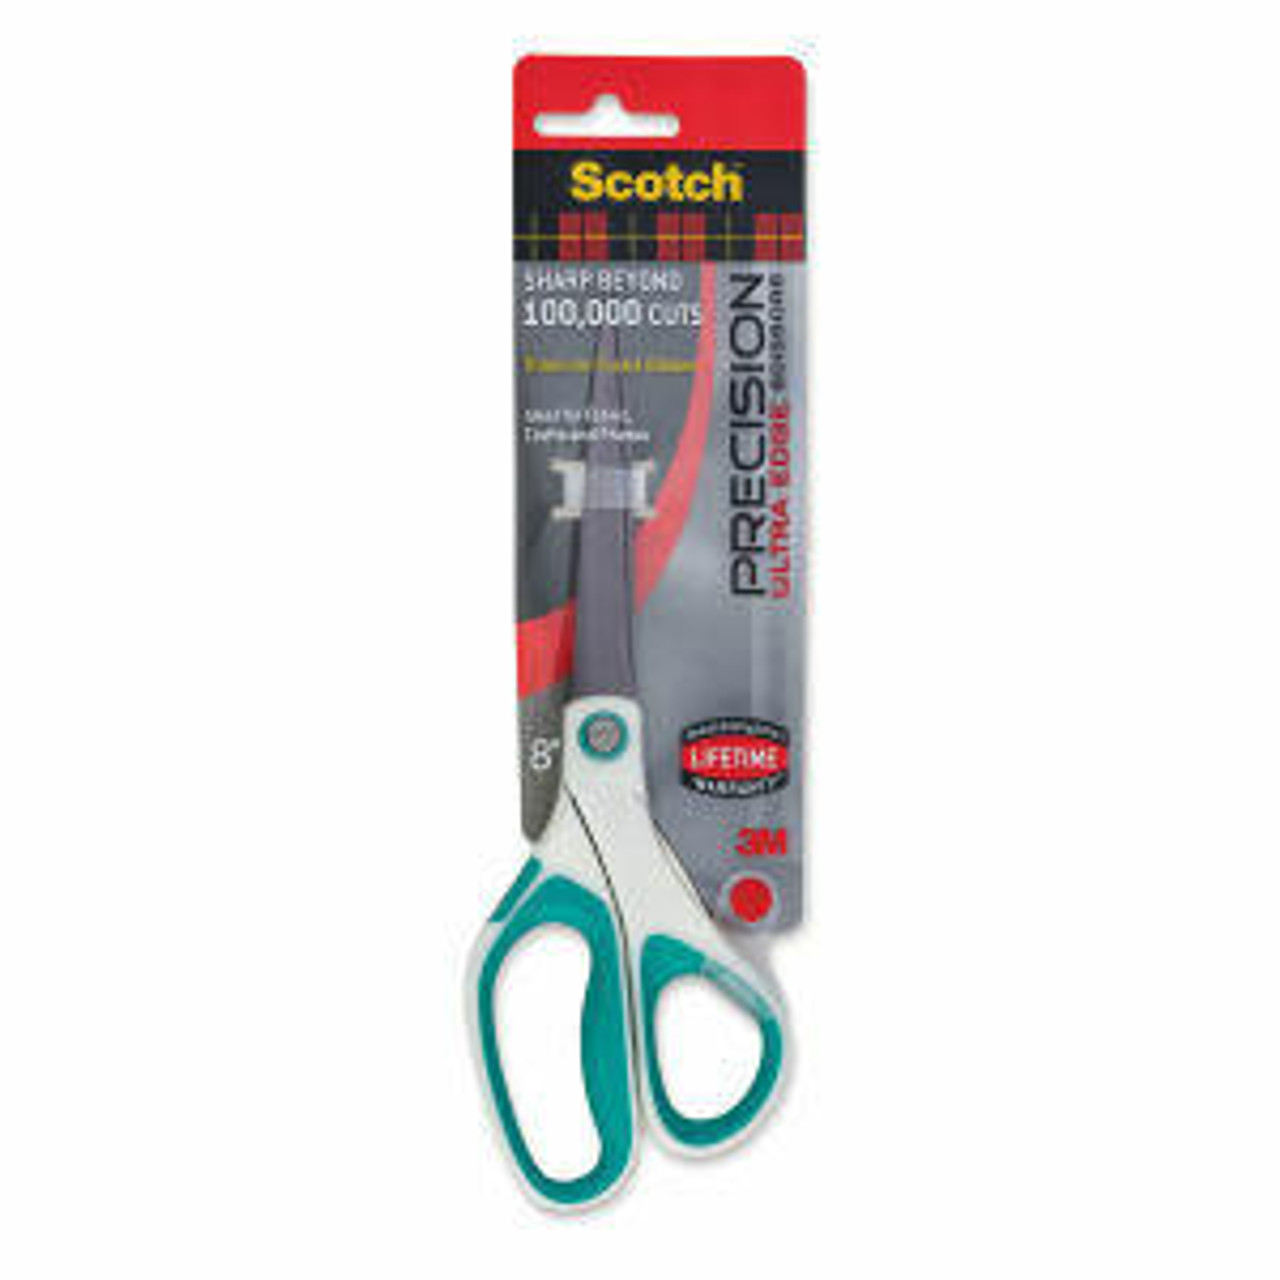 https://cdn11.bigcommerce.com/s-9uf88xhege/images/stencil/1280x1280/products/7642/50782/3m-co-3m-precision-ultra-edge-scissors-8-precision-ultra-edge-scissors__83752.1655111789.jpg?c=1?imbypass=on